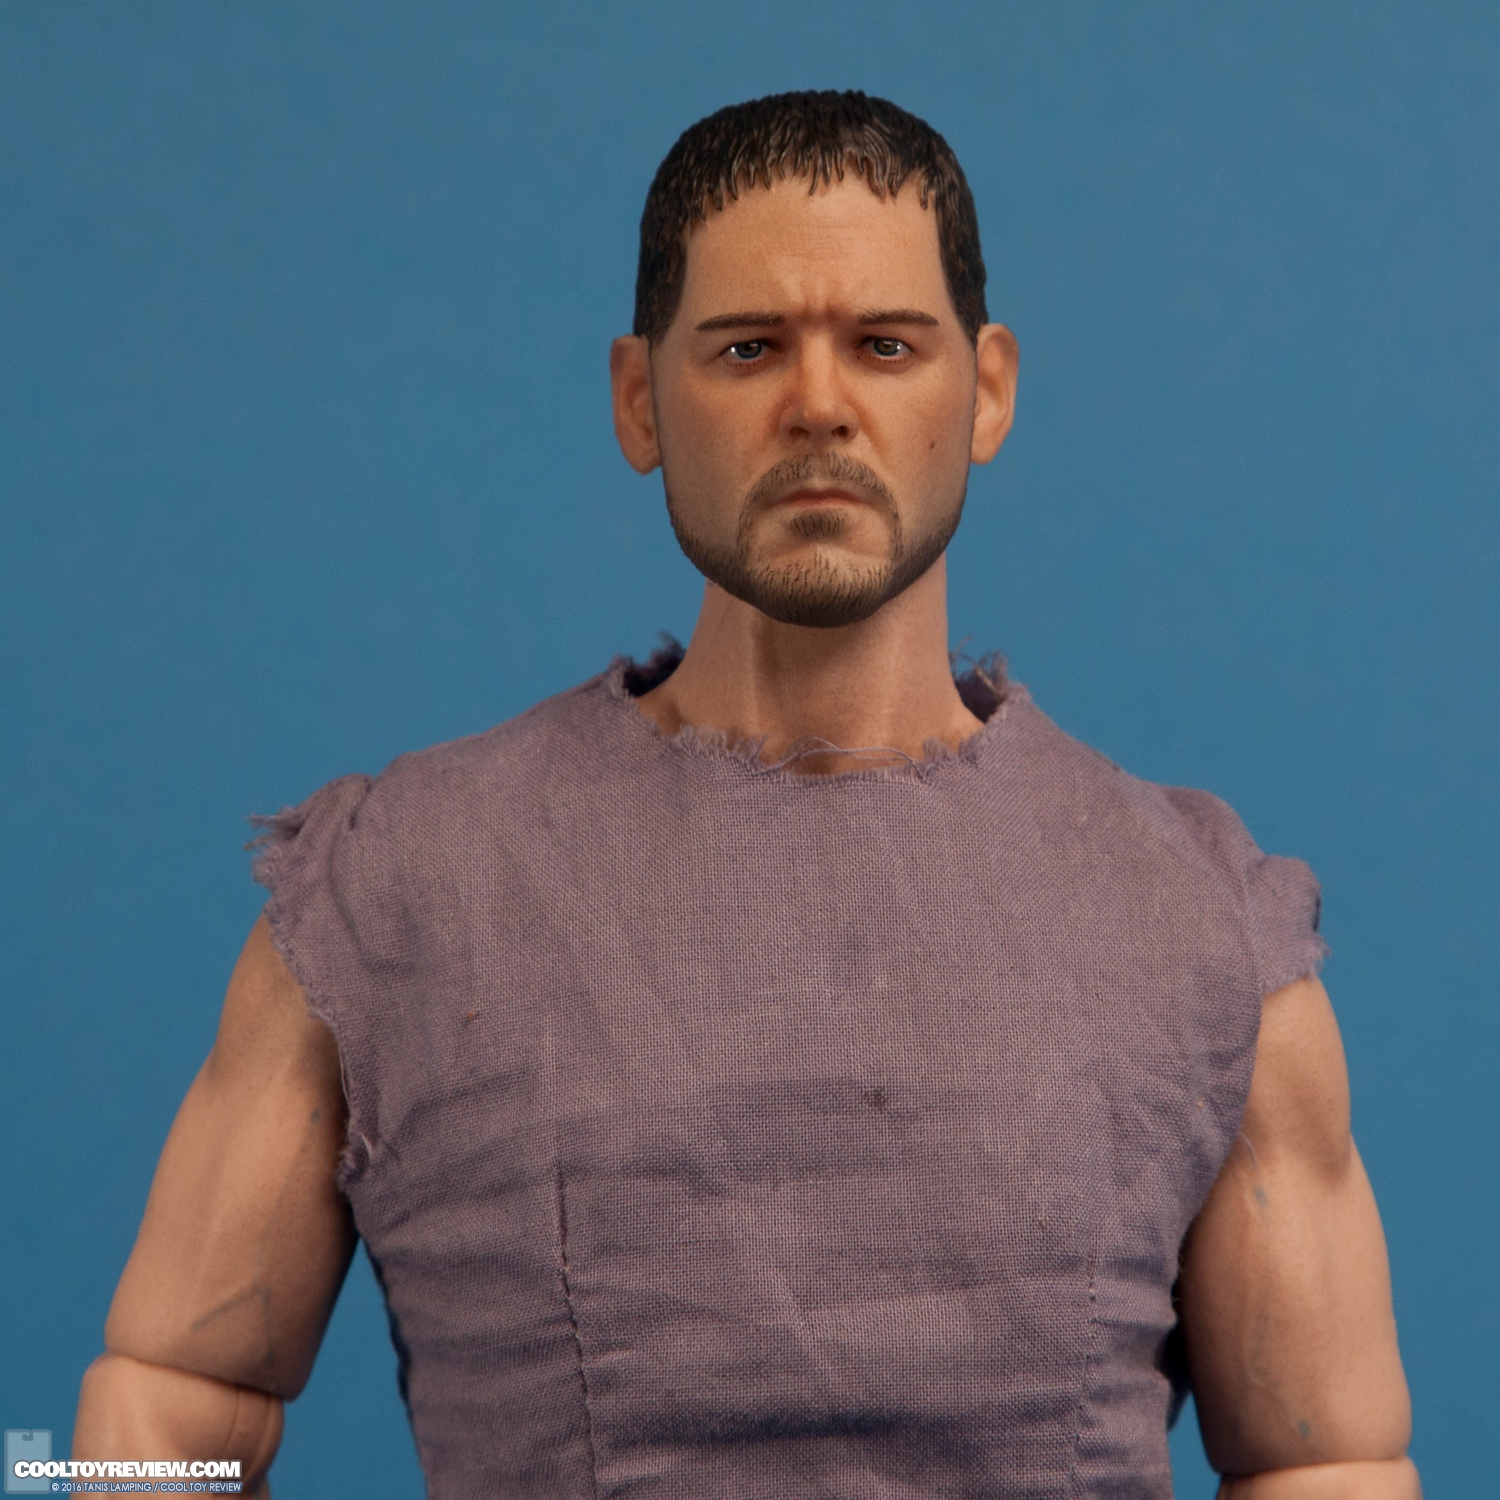 pangaea-toy-gladiator-general-sixth-scale-collectible-figure-029.jpg